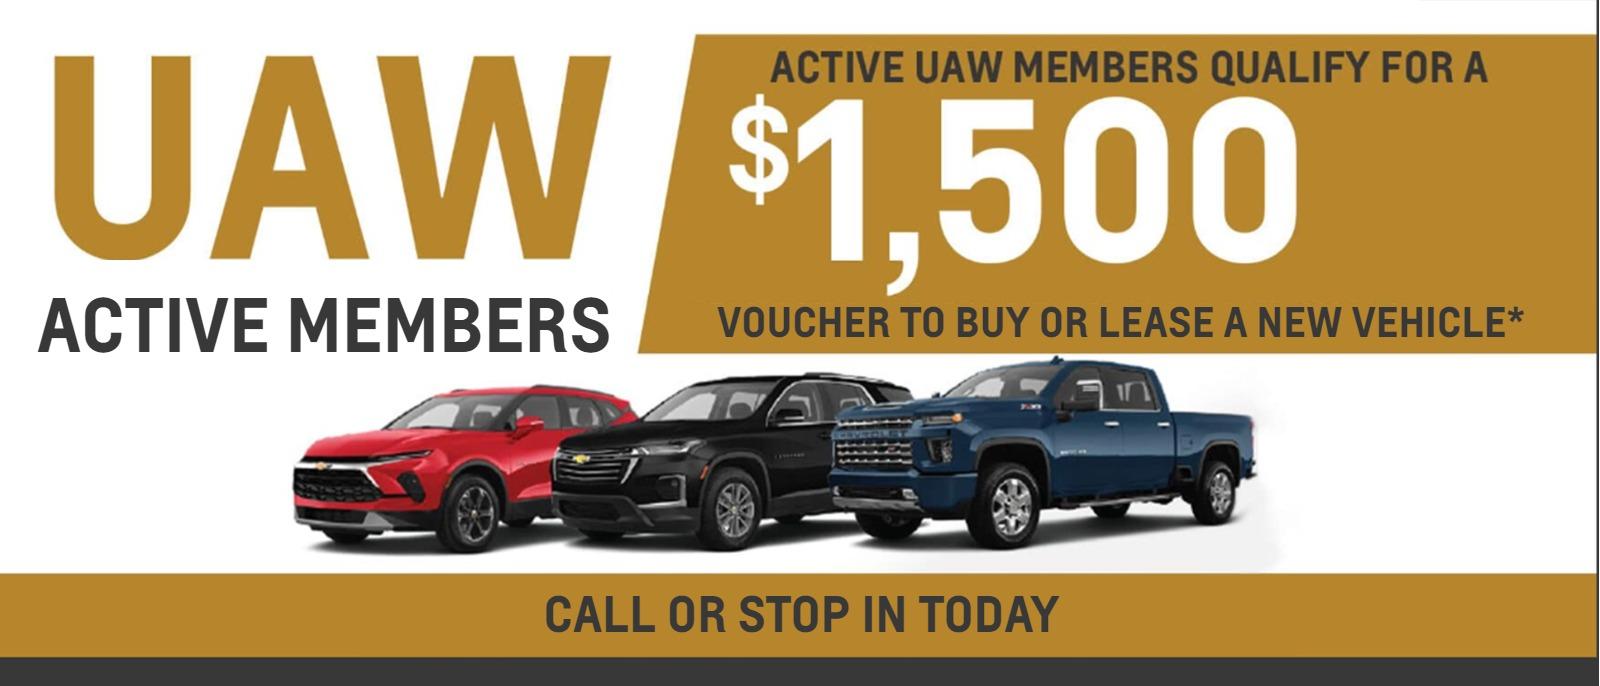 UAW ACTIVE MEMBERS
ACTIVE UAW MEMBERS QUALIFY FOR A $1,500
VOUCHER TO BUY OR LEASE A NEW VEHICLE*
CALL OR STOP IN TODAY